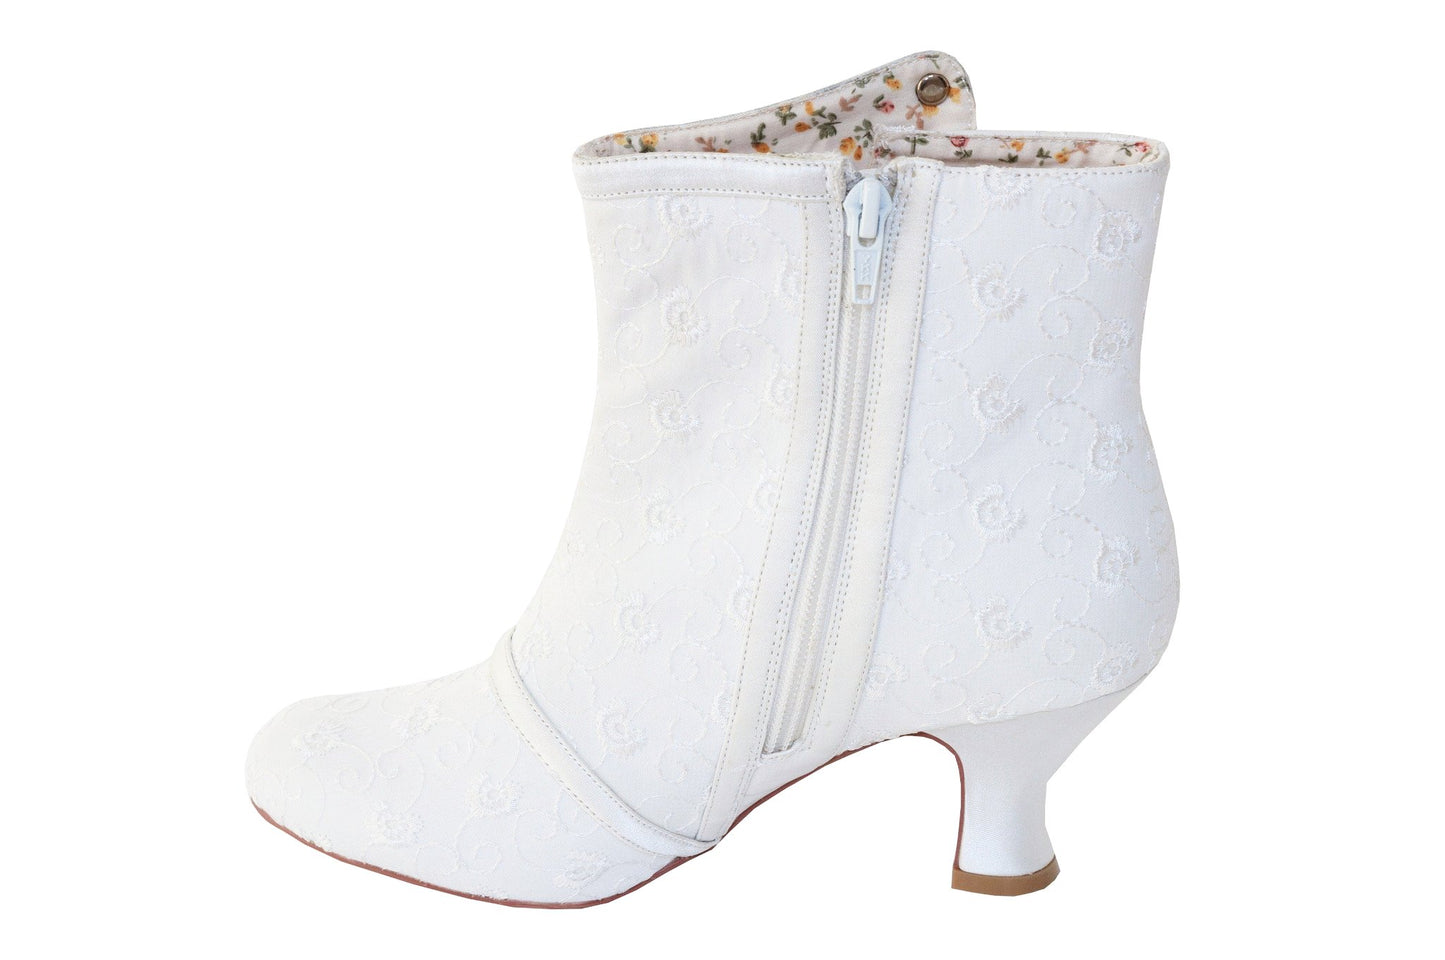 Nelly Bridal Ankle Boots